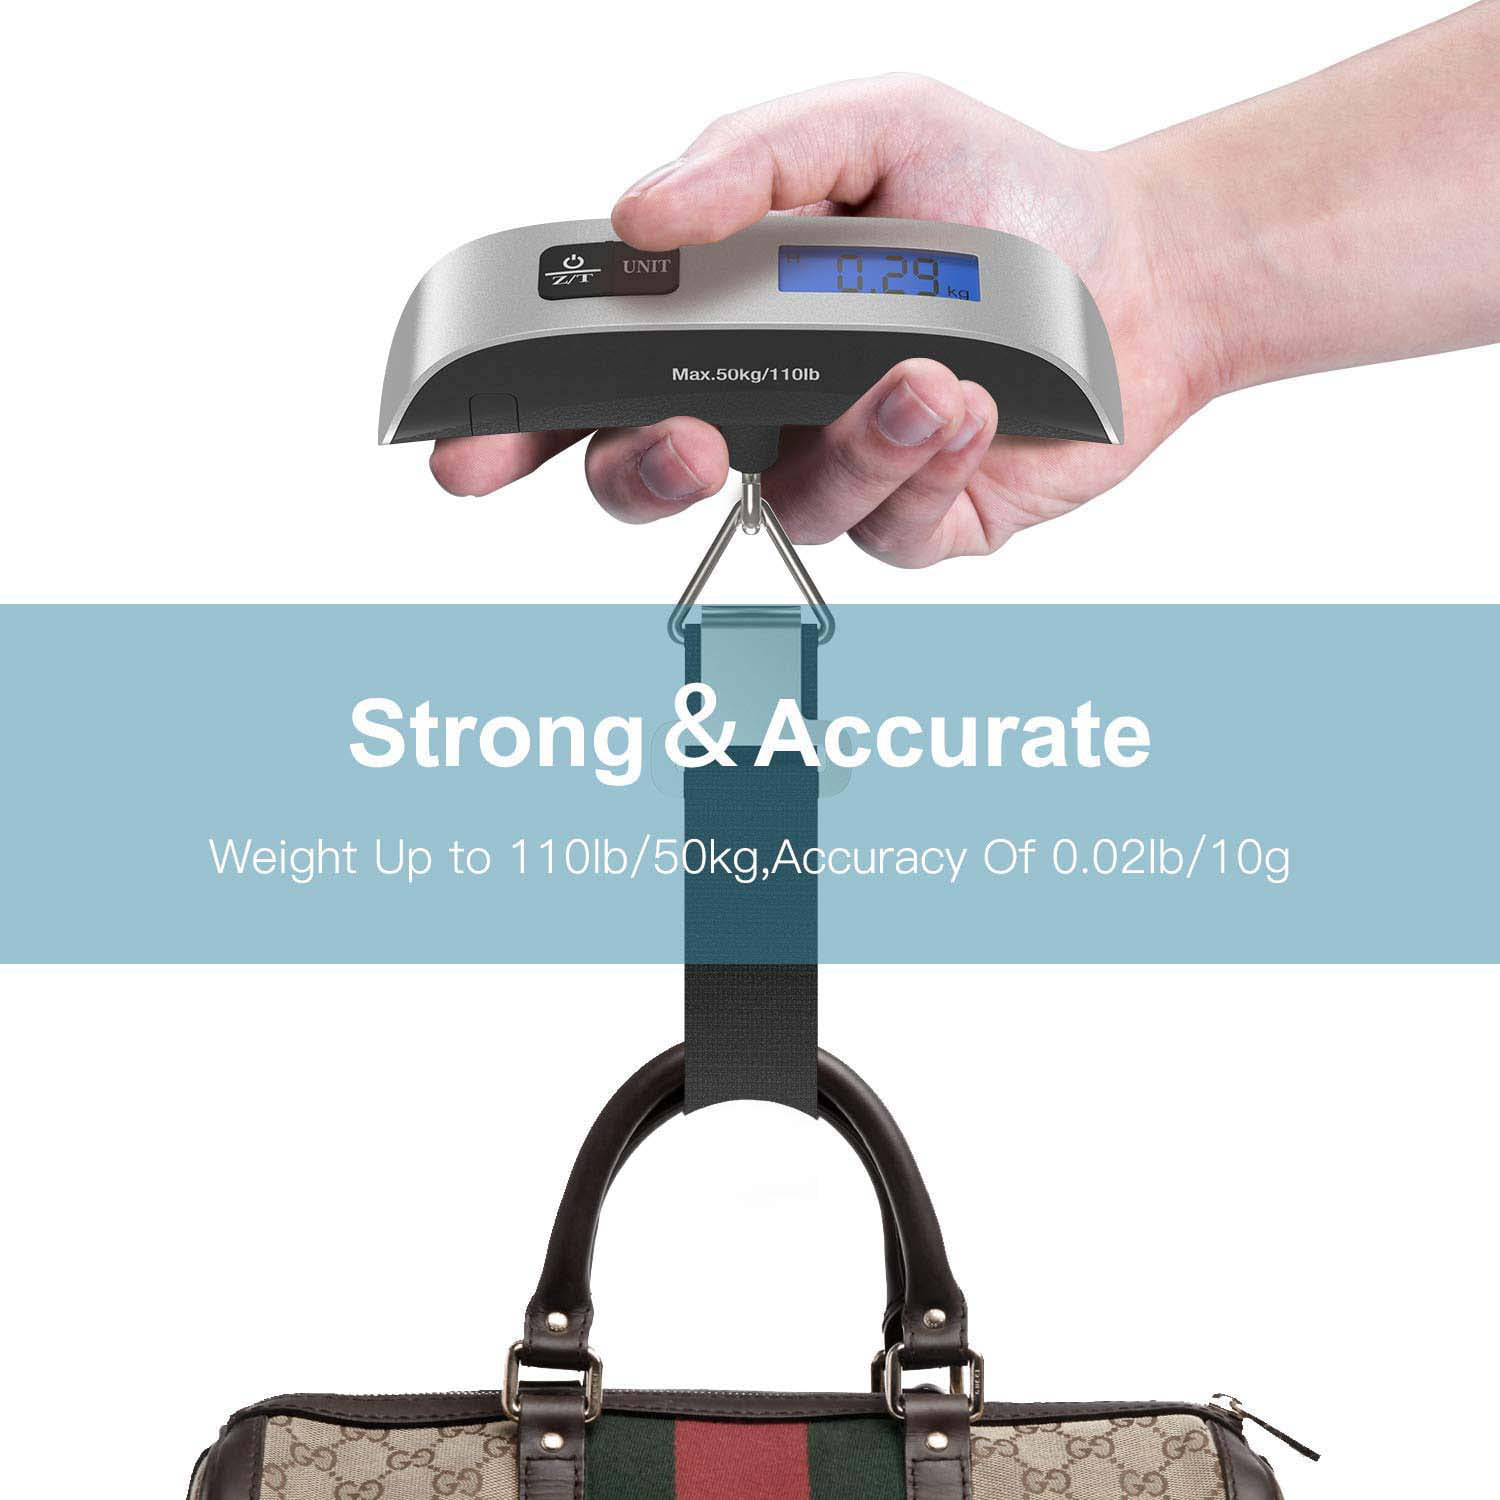 American Weigh Luggage Scale Digital Backlit LCD Screen, Auto-Hold Feature  LS-110 Grey